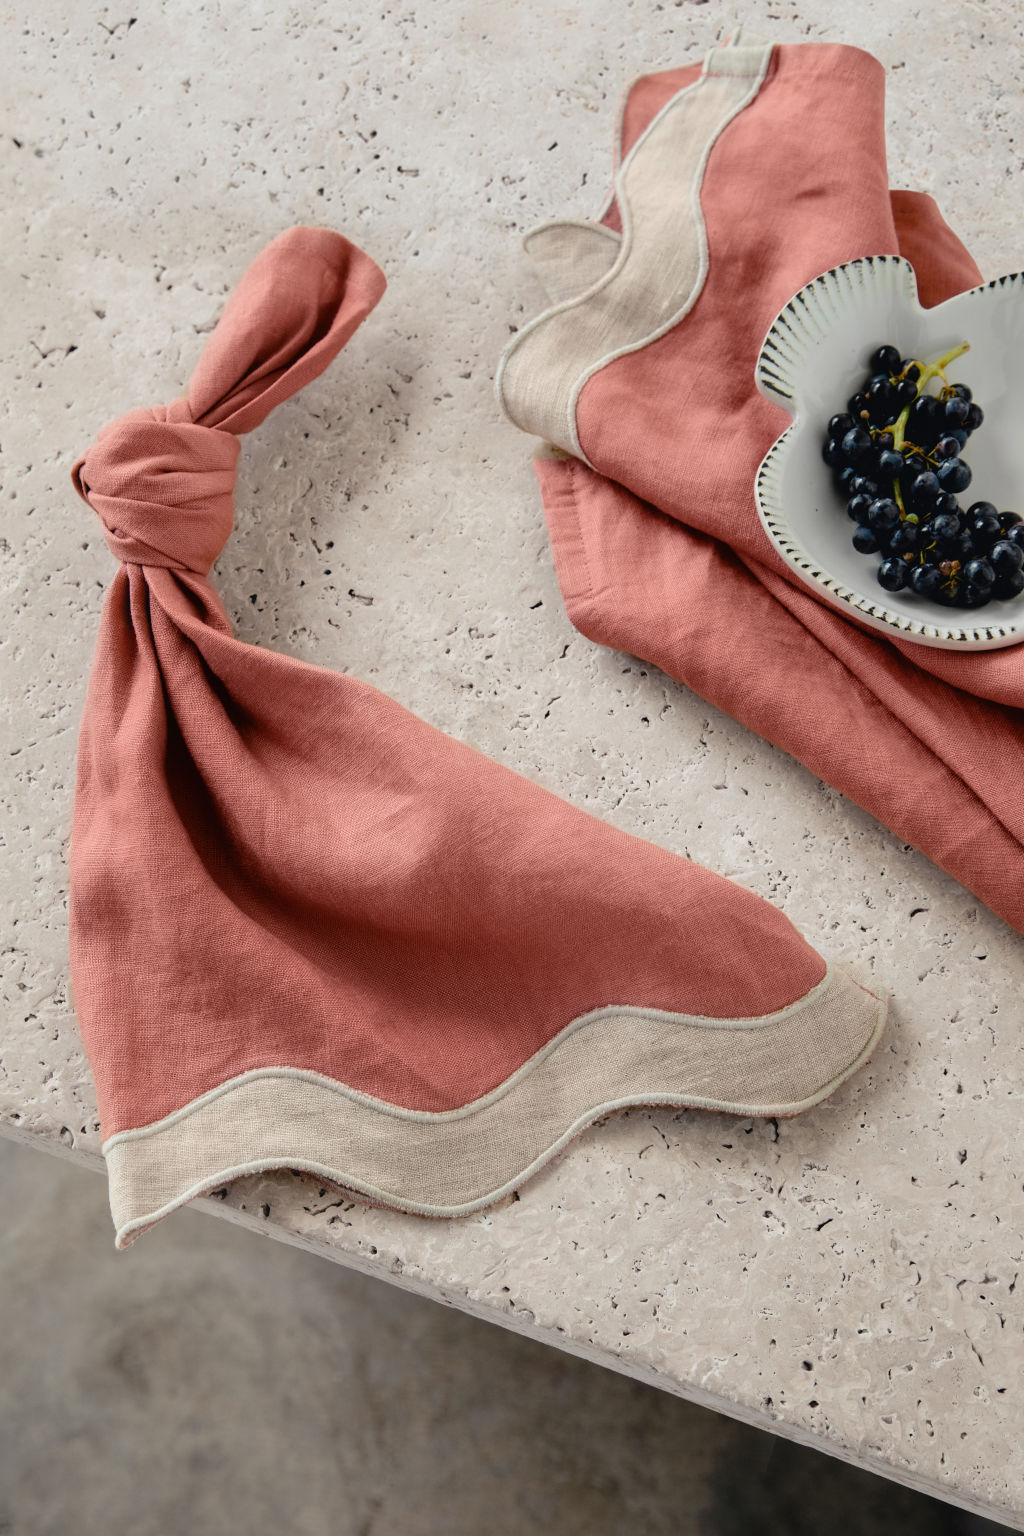 These distinct napkins are made from Eurpoean linen. Photo: Supplied